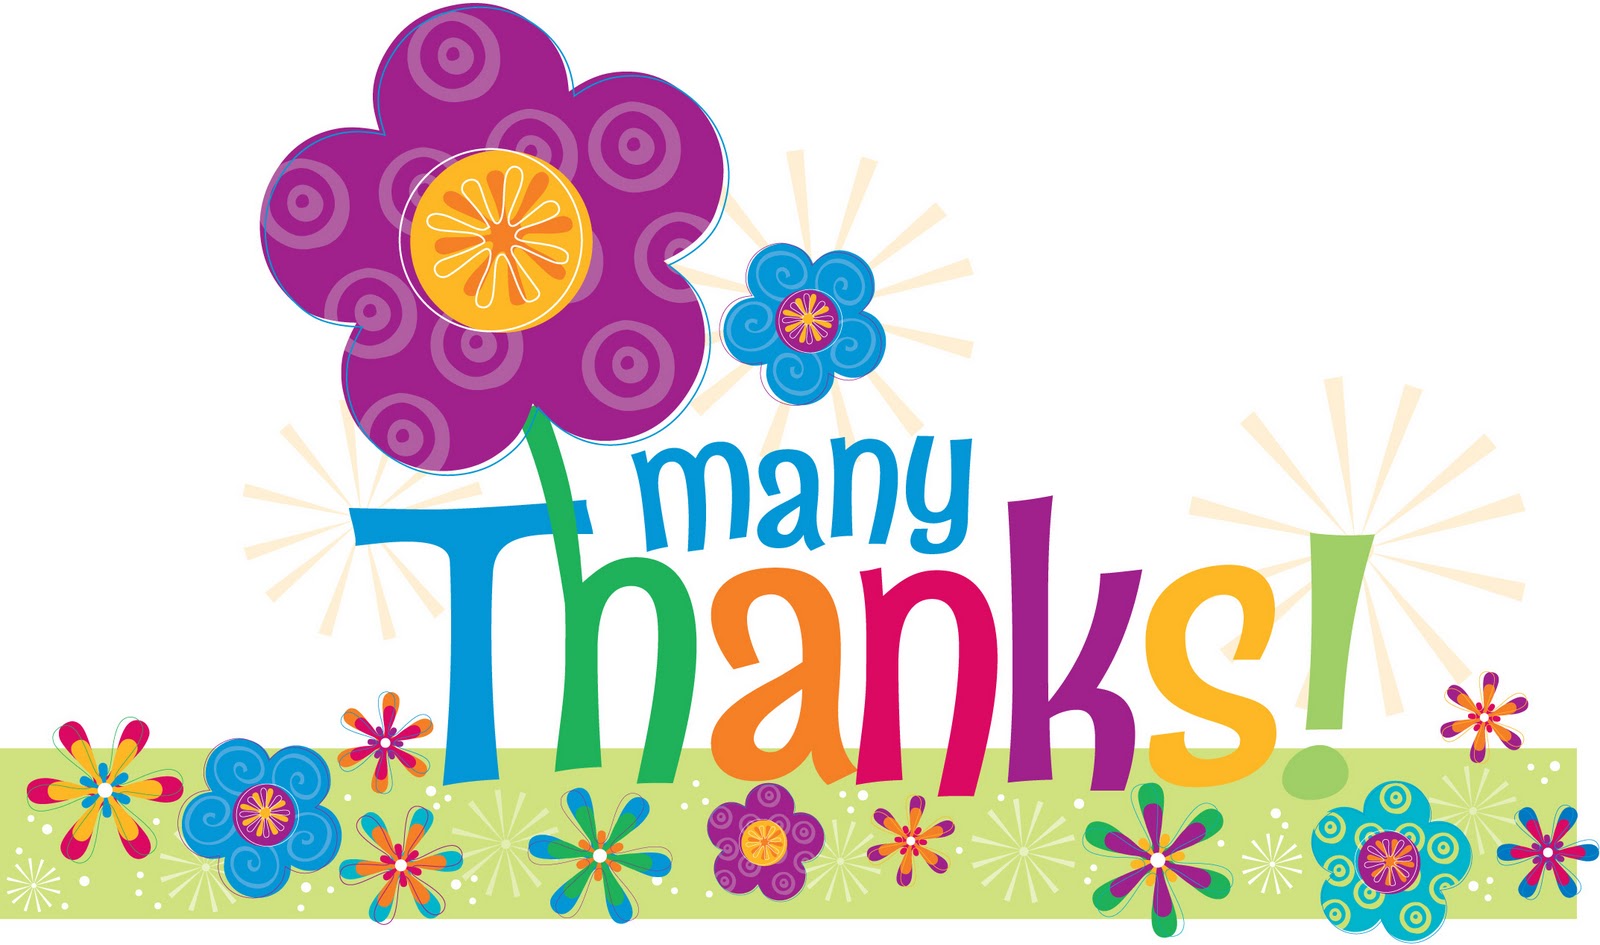 Thank You Free Funny Thank You Images Free Clipart Clip Art Image 7 2